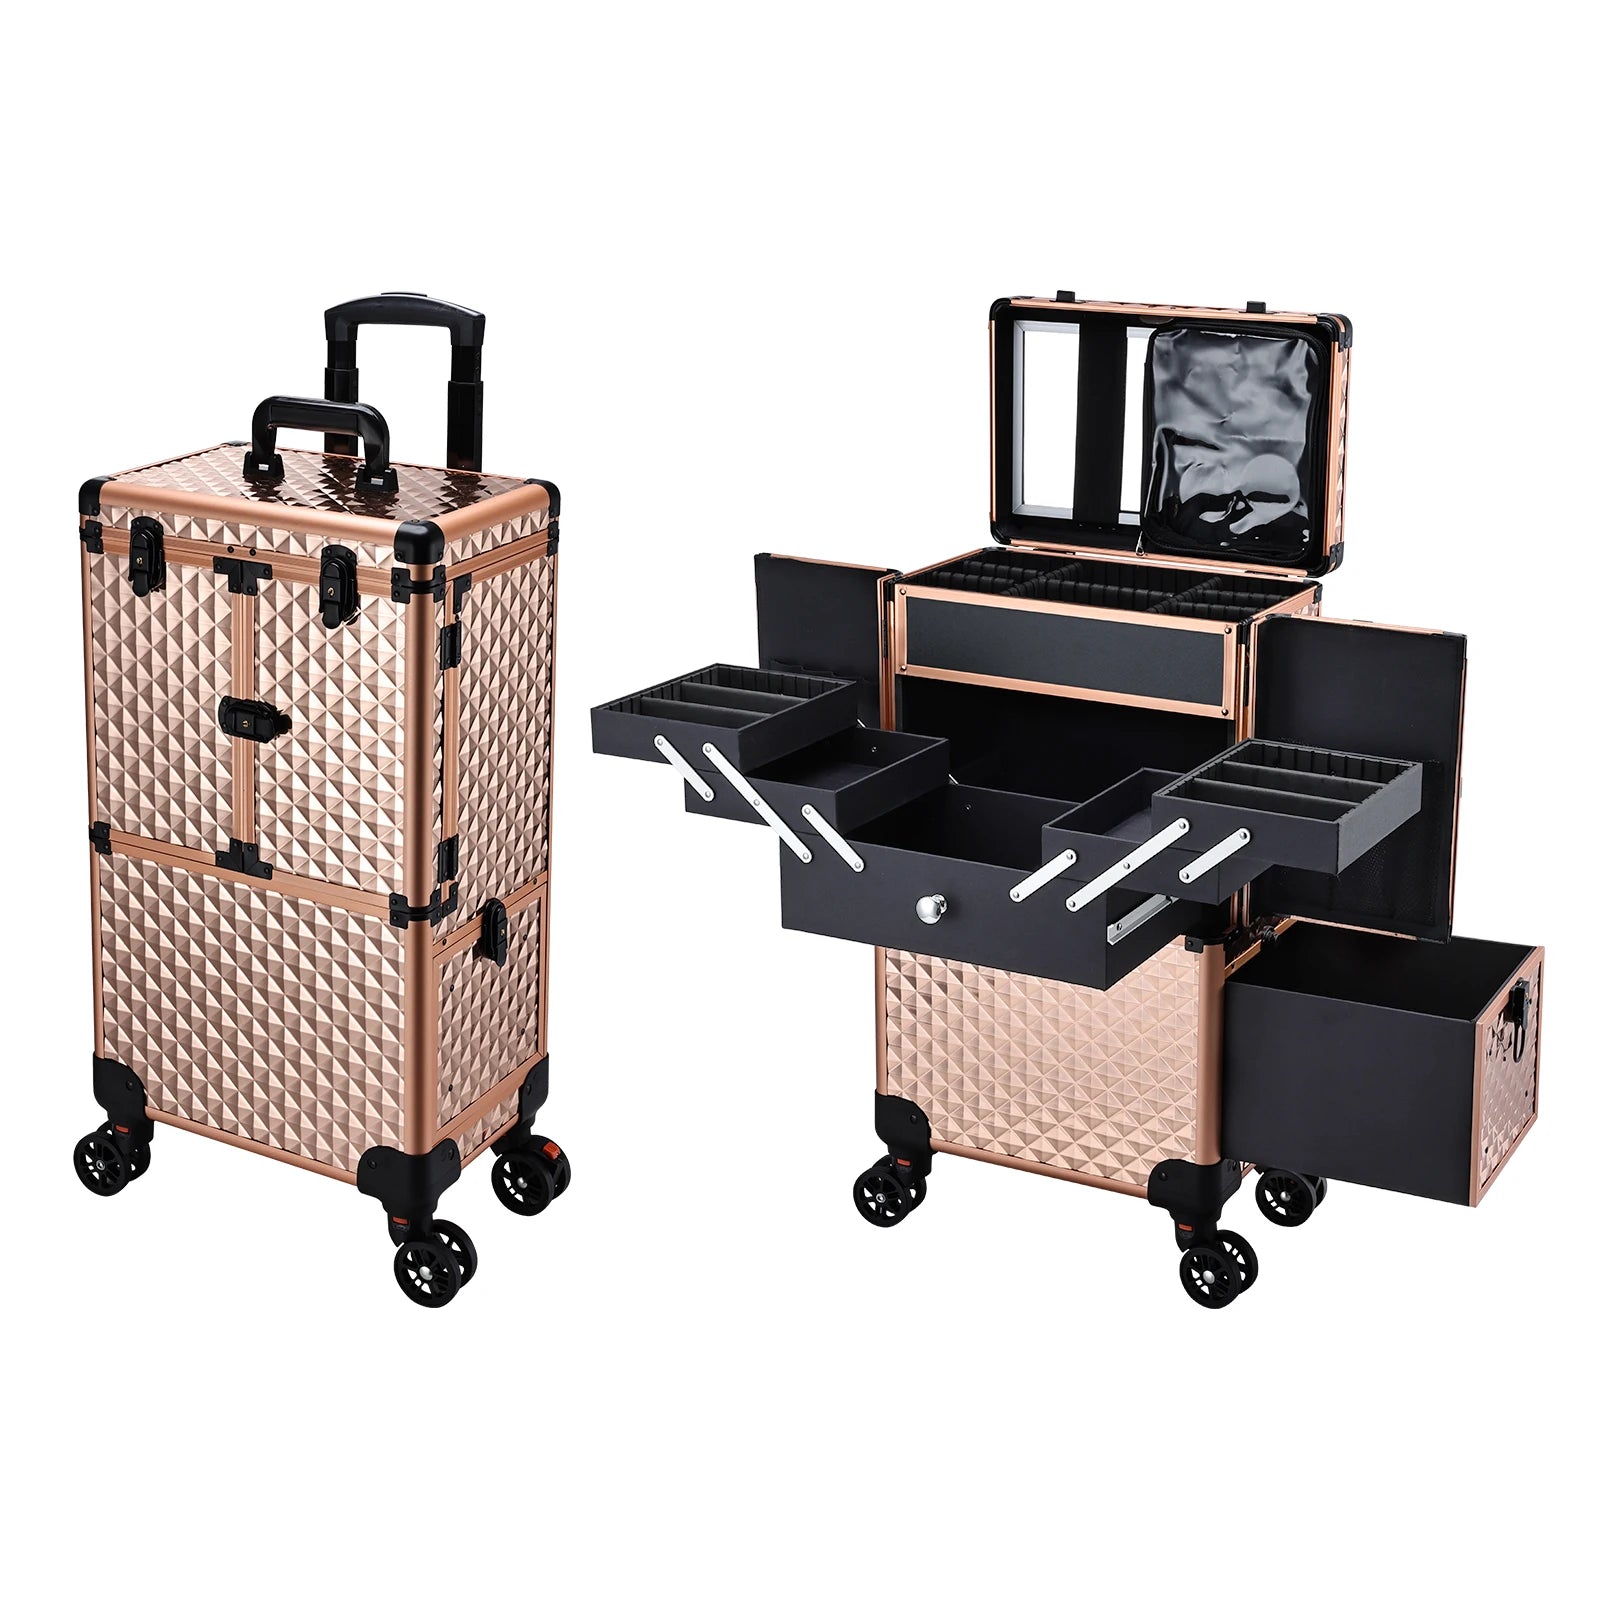 Professional Extendable Tray Makeup Case On Wheels LUXLIFE BRANDS